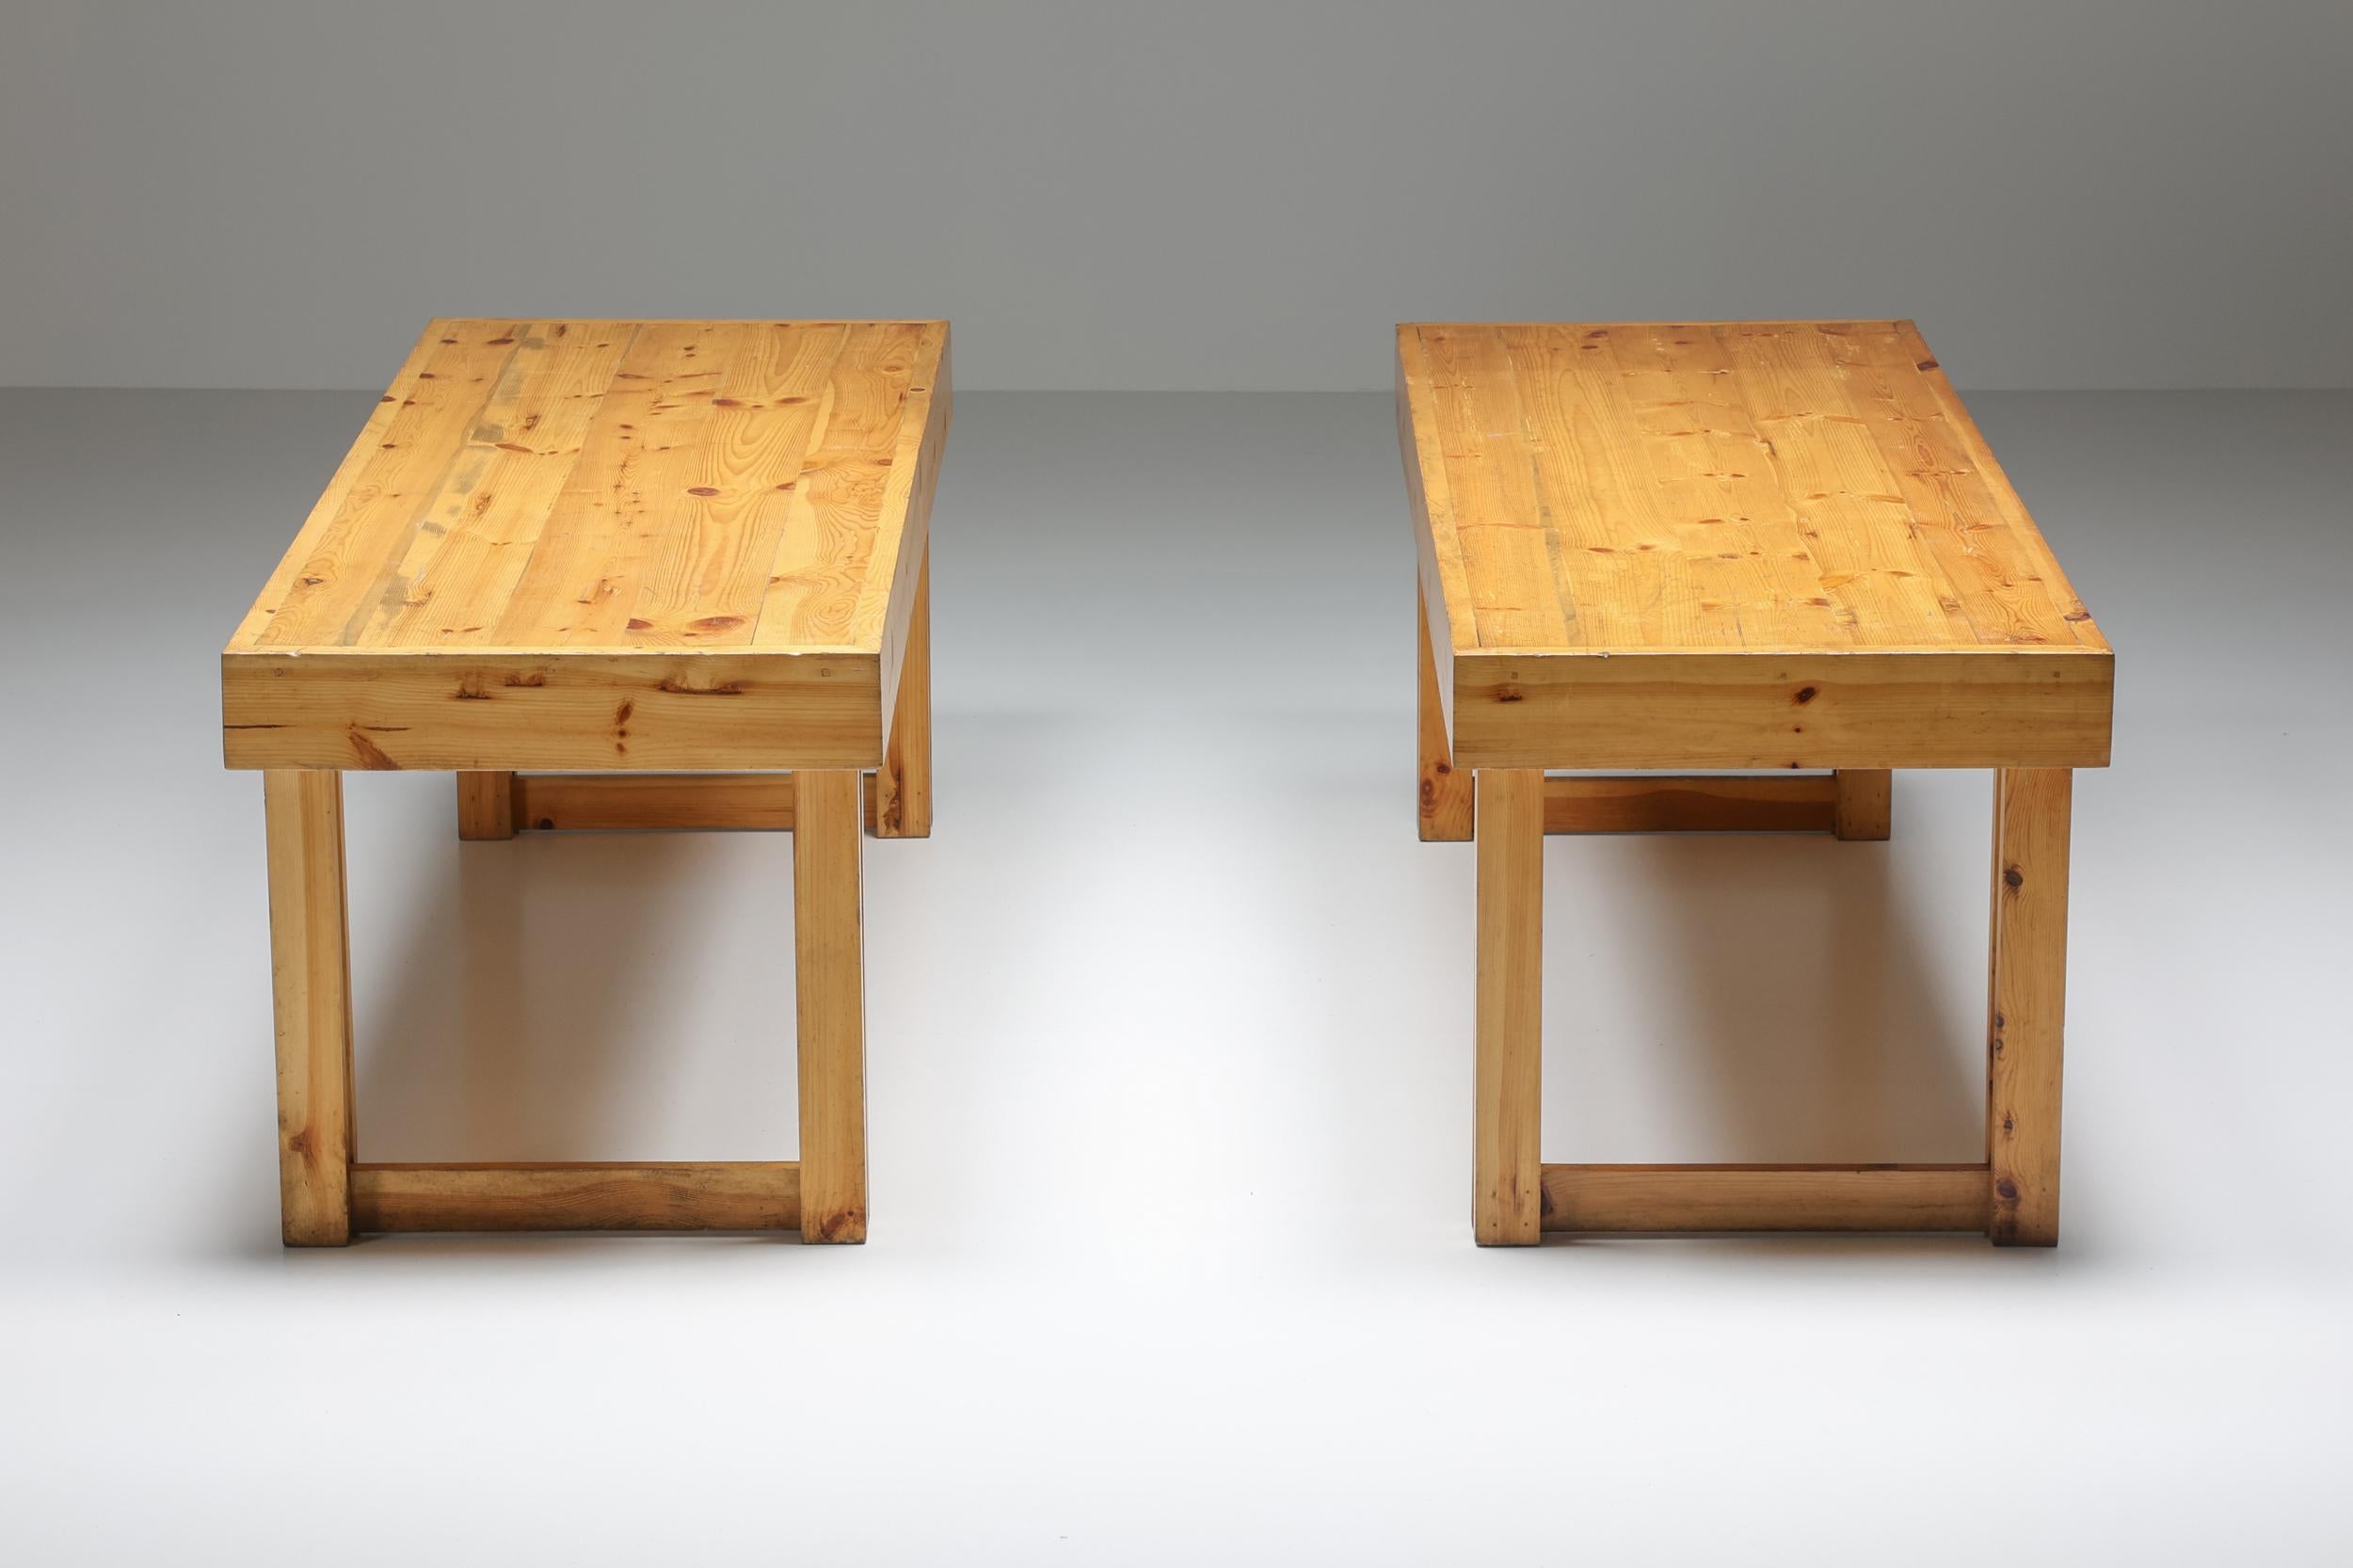 Brutalist; Rustic; Modernist; Italian Pine Bench and Table from Old Vinery; 960s; 

Rustic modernist dining table in Italian pine made in the 1960s. Naturalist and brutal pieces which were used as a tasting table in a prominent Tuscany winery. The